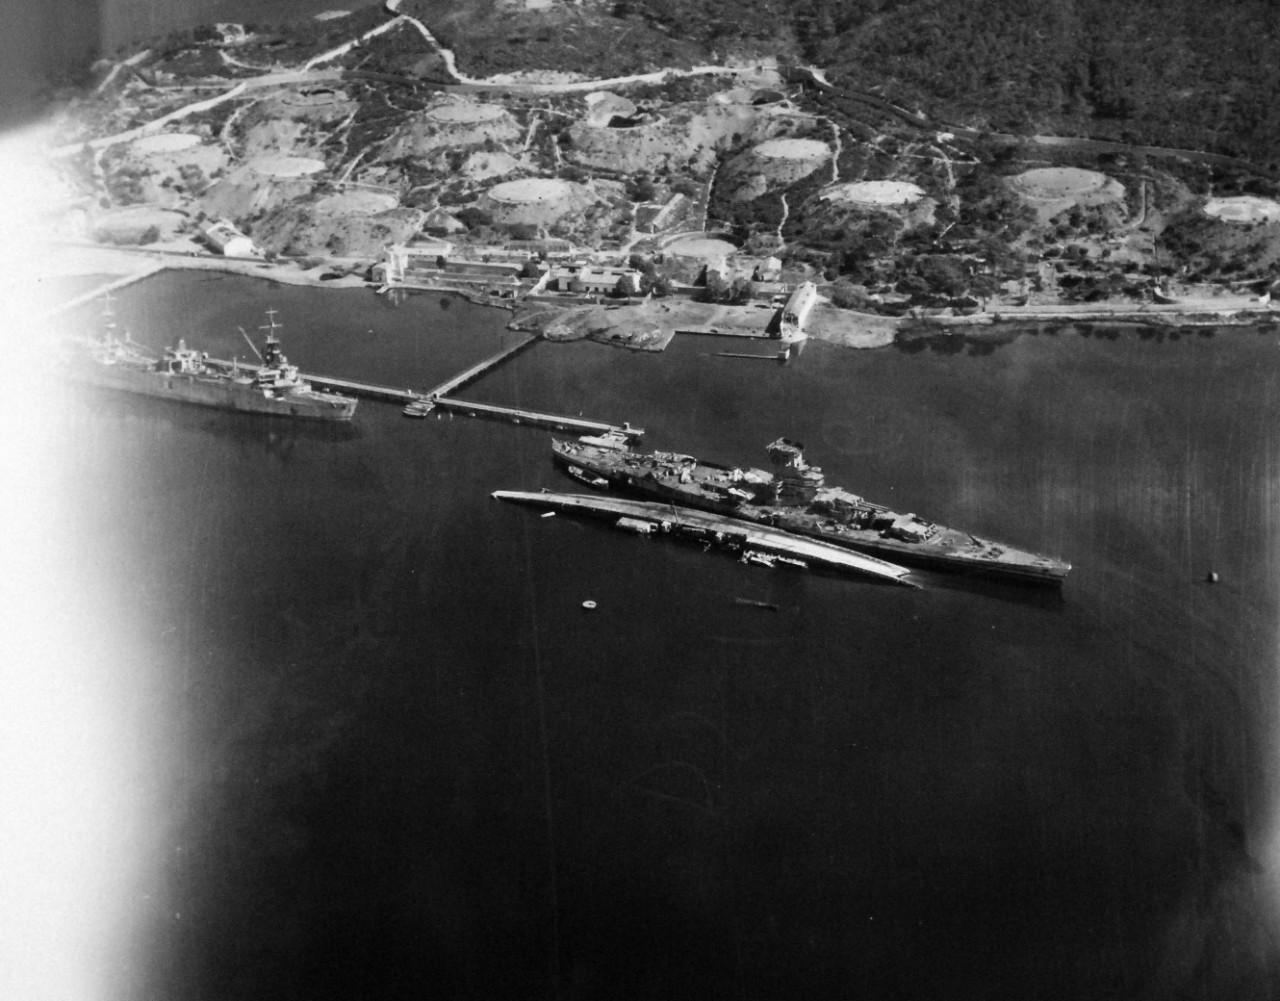 80-G-364004:  Invasion of Southern France, Toulon, August 1944.   Aerial view of the destruction to the harbor and installations at Toulon, France.  Taken by crew of USS Catoctin   (AGC 5).  Photograph received on 2 April 1946.   Official U.S. Navy Photograph, now in the collections of the National Archives.  (2014/7/10).